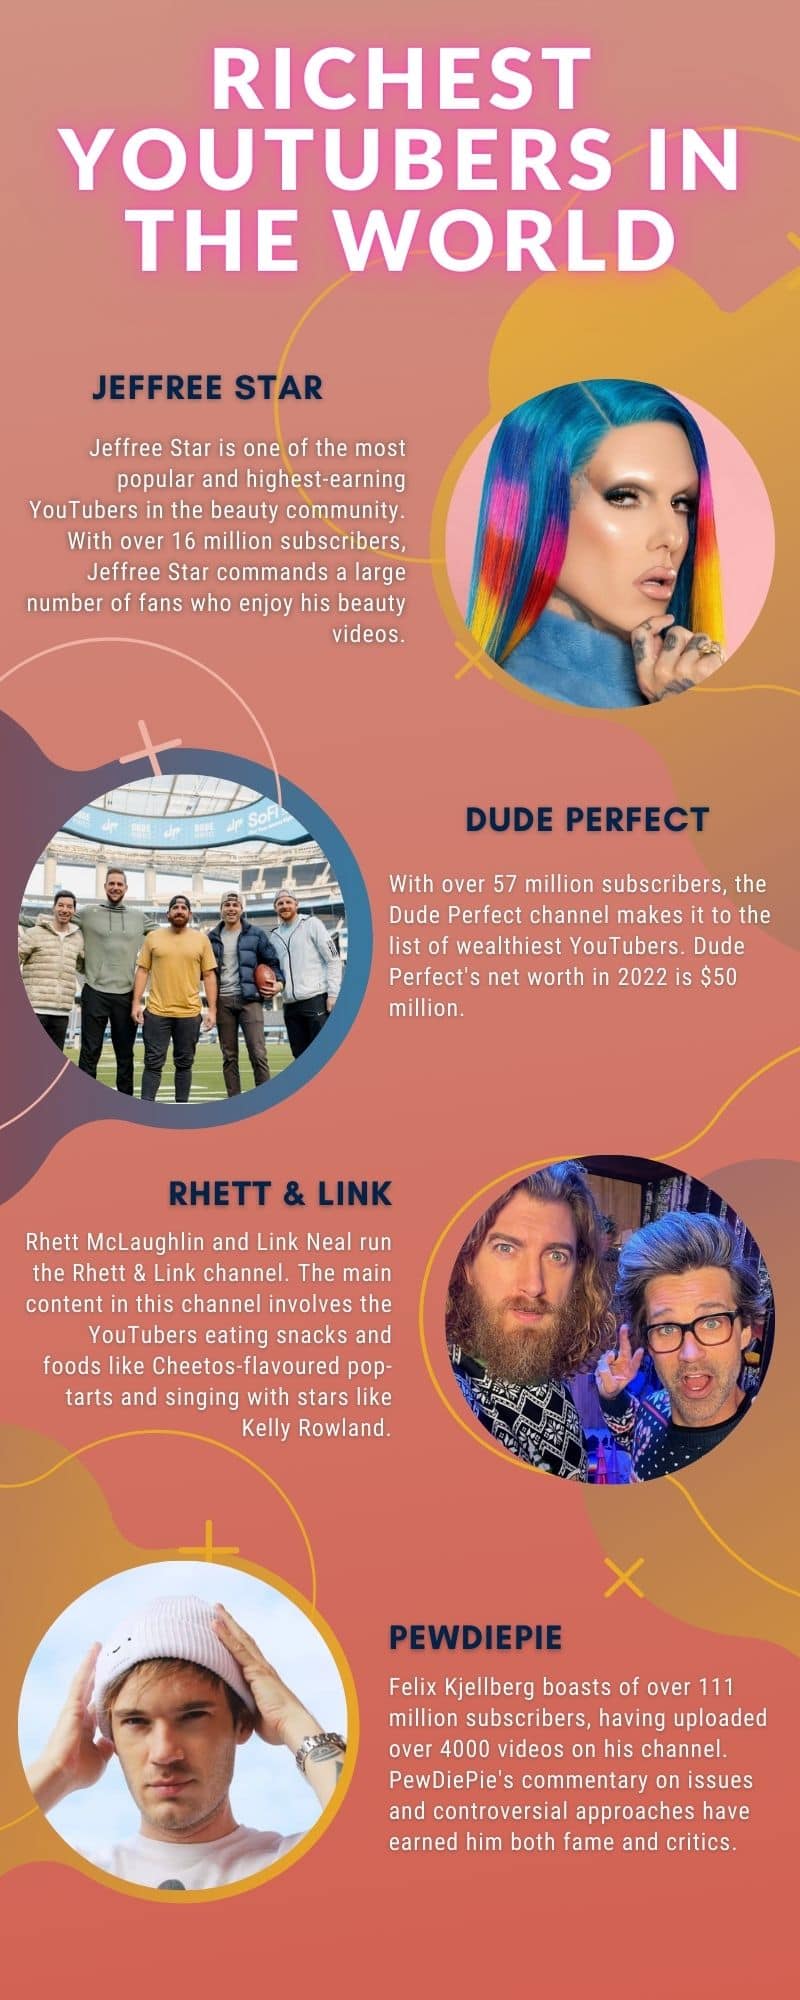 Richest YouTubers in the world